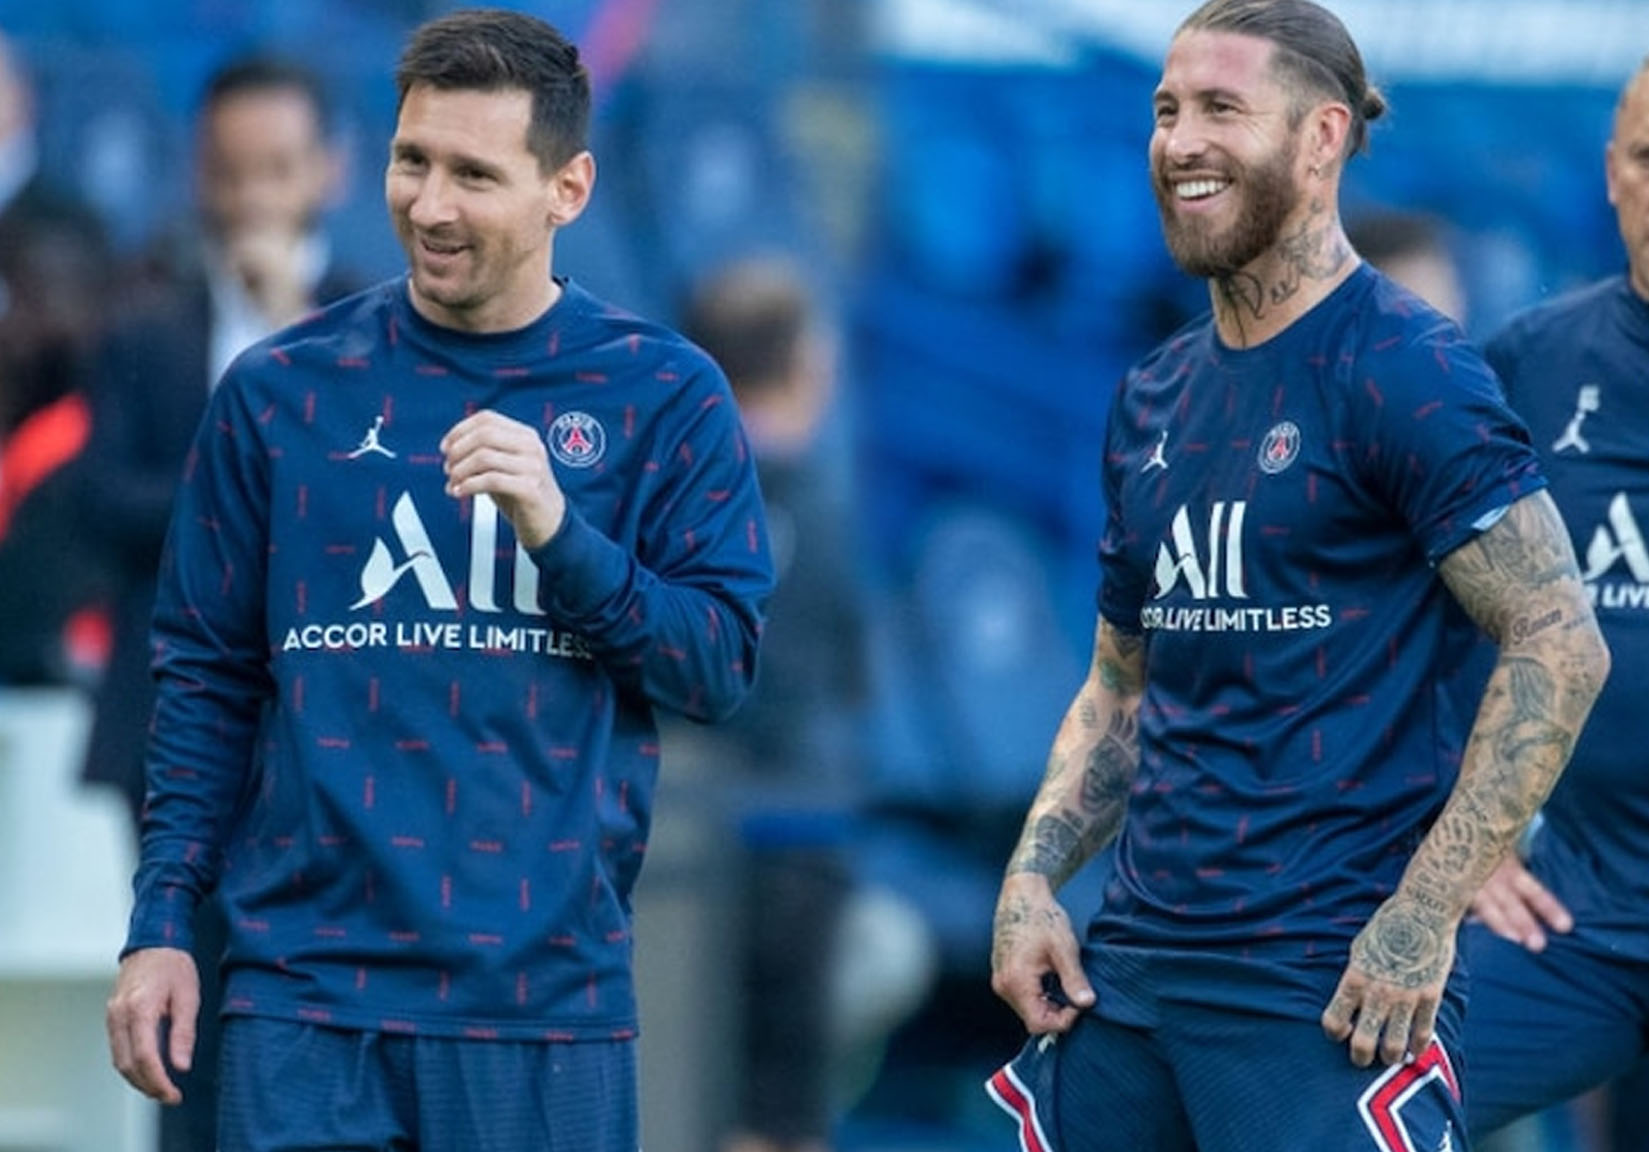 Sergio Ramos crowns Lionel Messi as the greatest footballer of all time